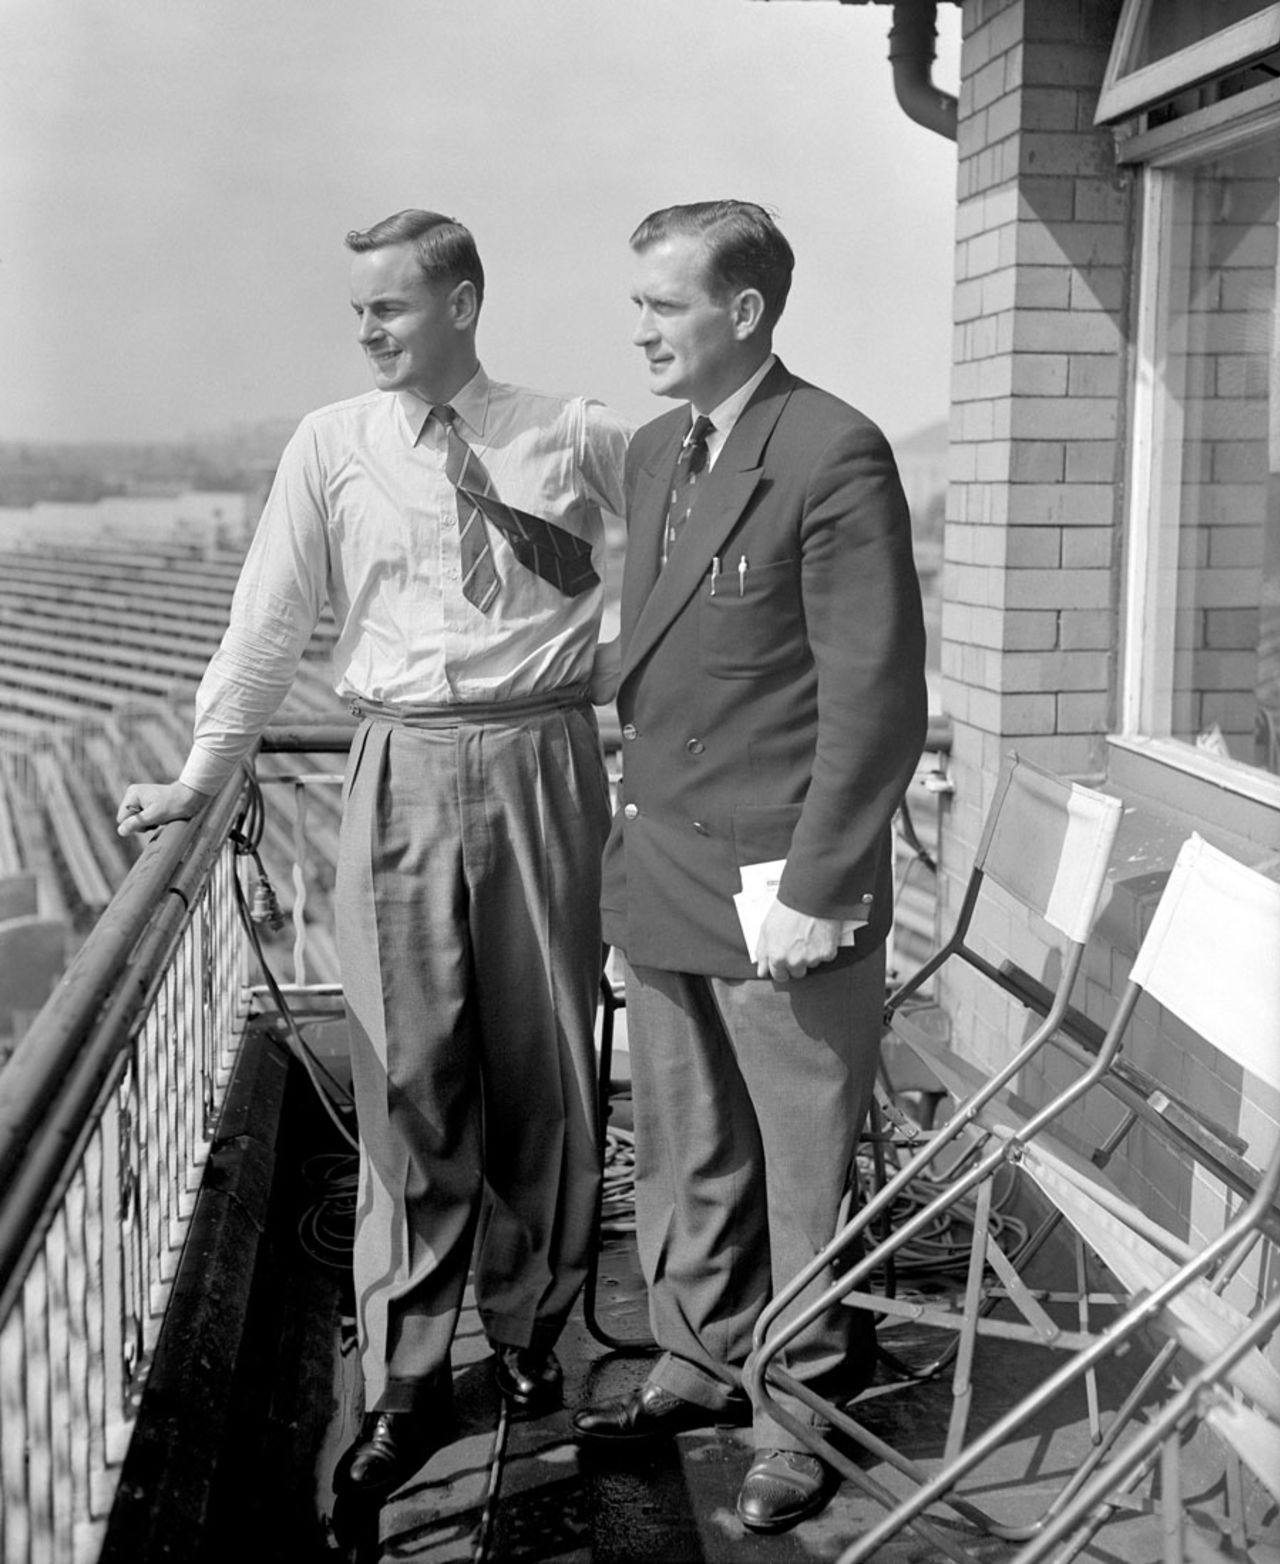 Peter May and Jim Laker look out from the players' balcony before the start of the third day, England v Australia, 4th Test, Old Trafford, 3rd day, July 28, 1956